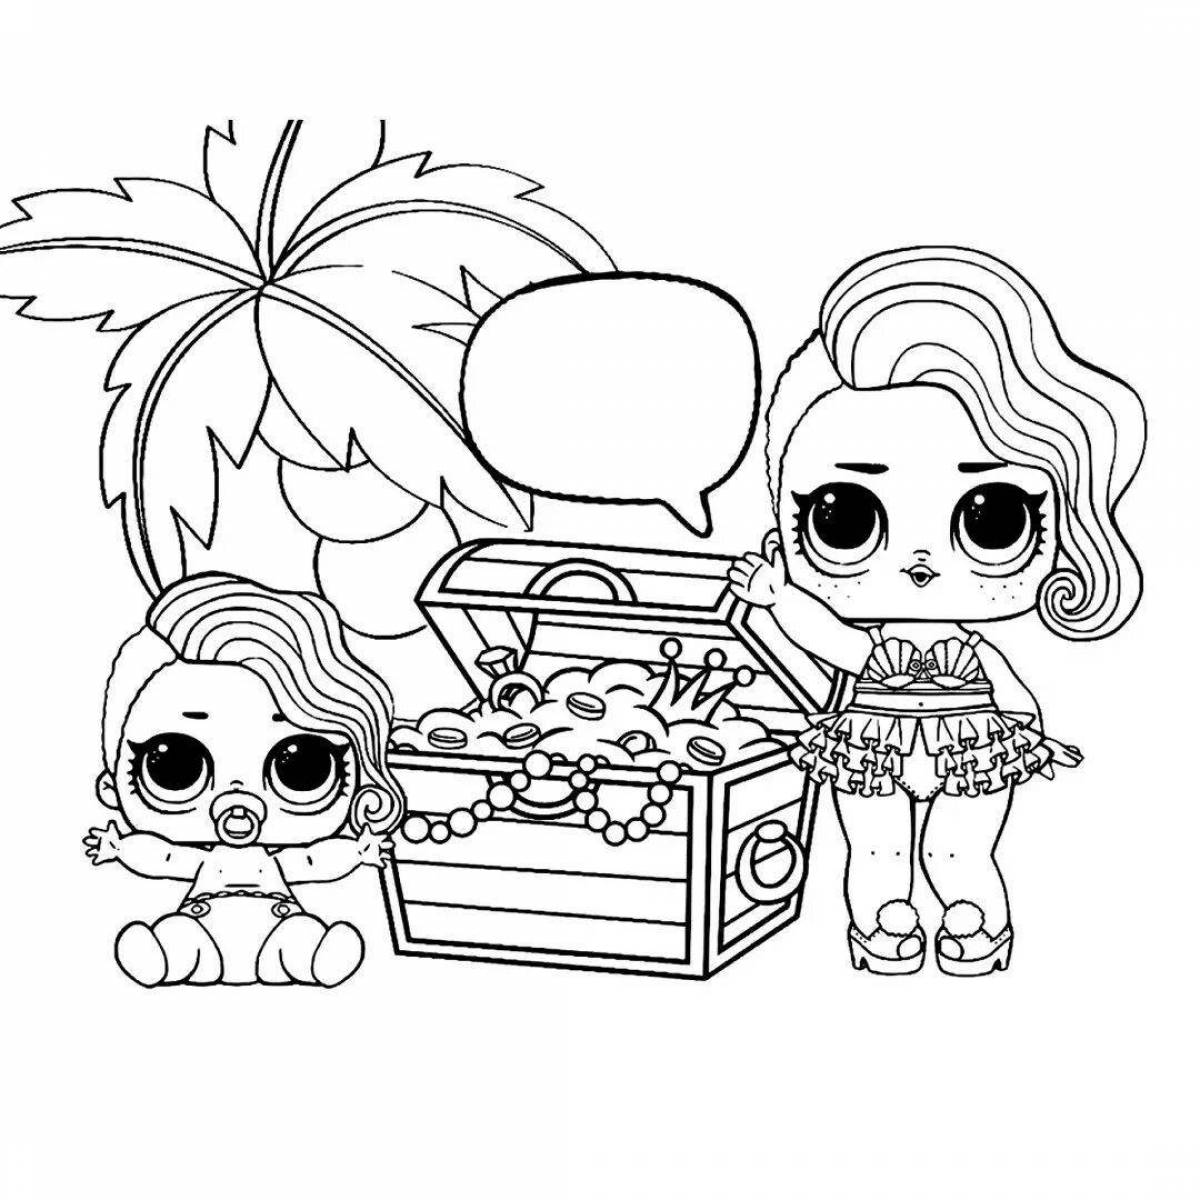 Violent dollhouse lol coloring pages for girls